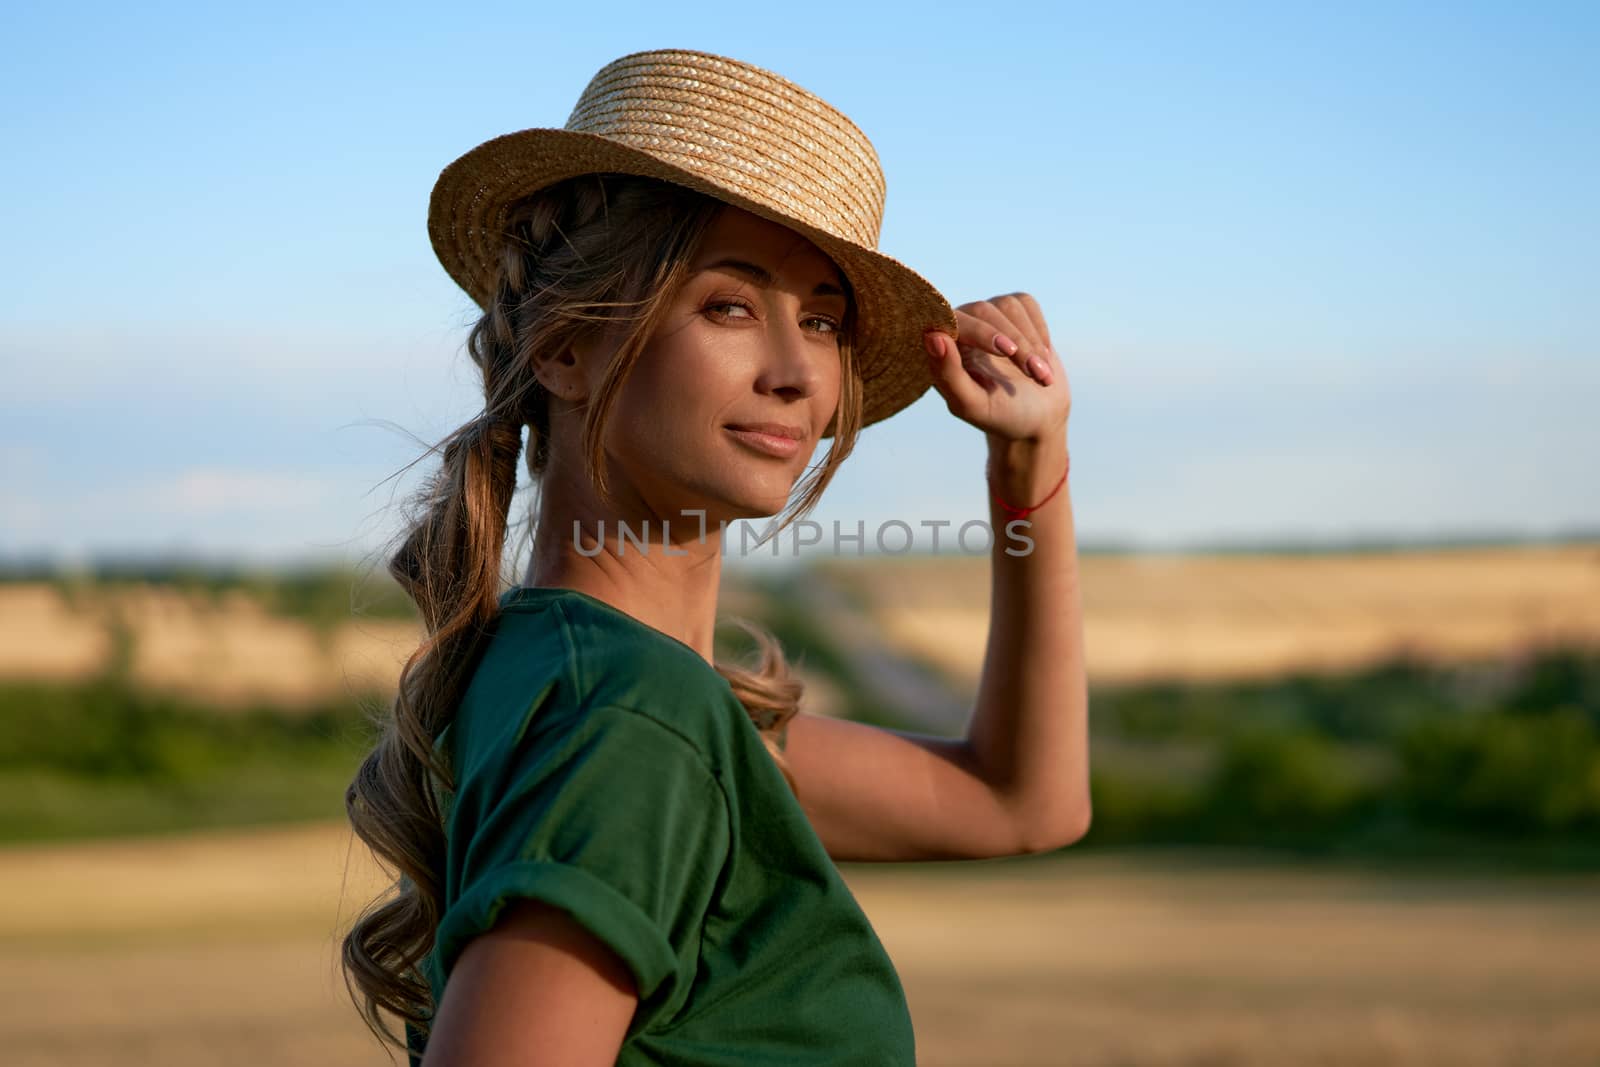 Woman farmer straw hat standing farmland smiling Female agronomist specialist farming agribusiness Happy positive caucasian worker agricultural field Pretty girl denim jeans green t-shirt harvest